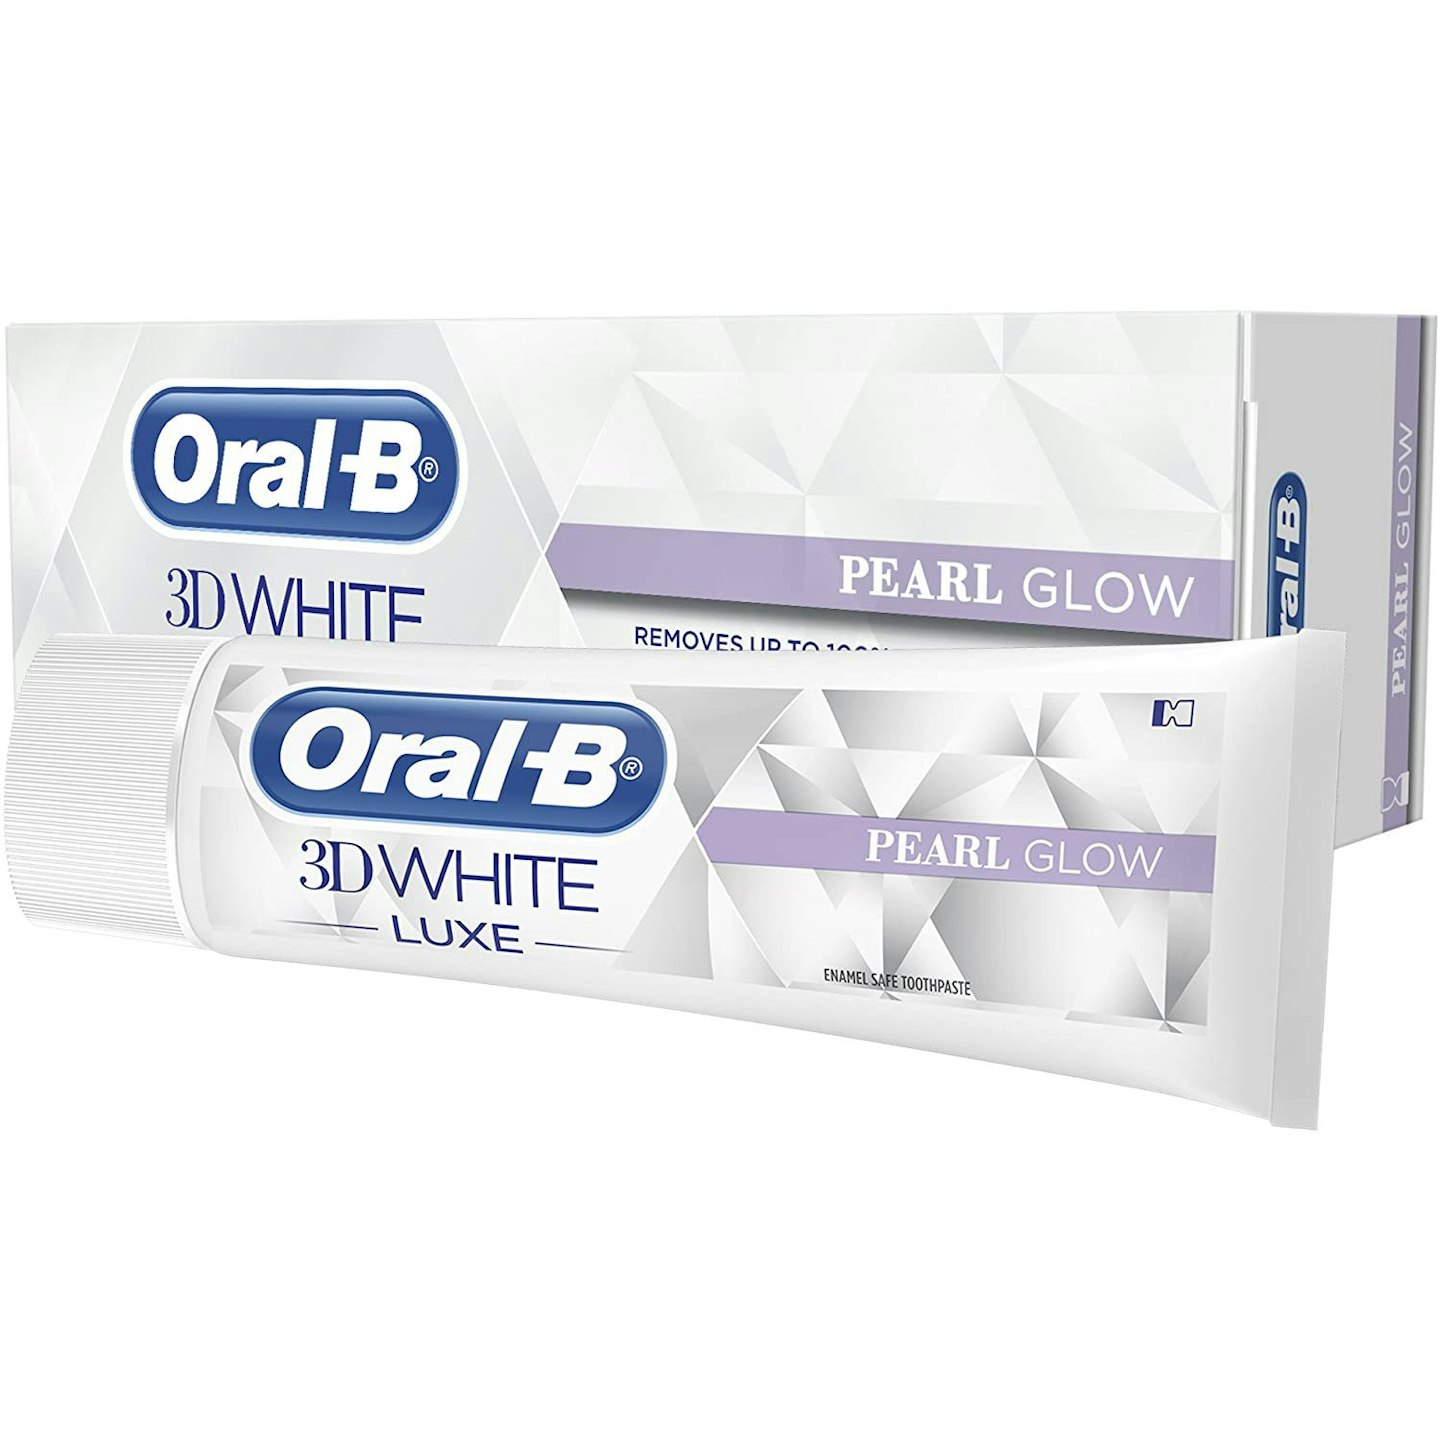 Oral-B 3D White Luxe Pearl Glow Toothpaste